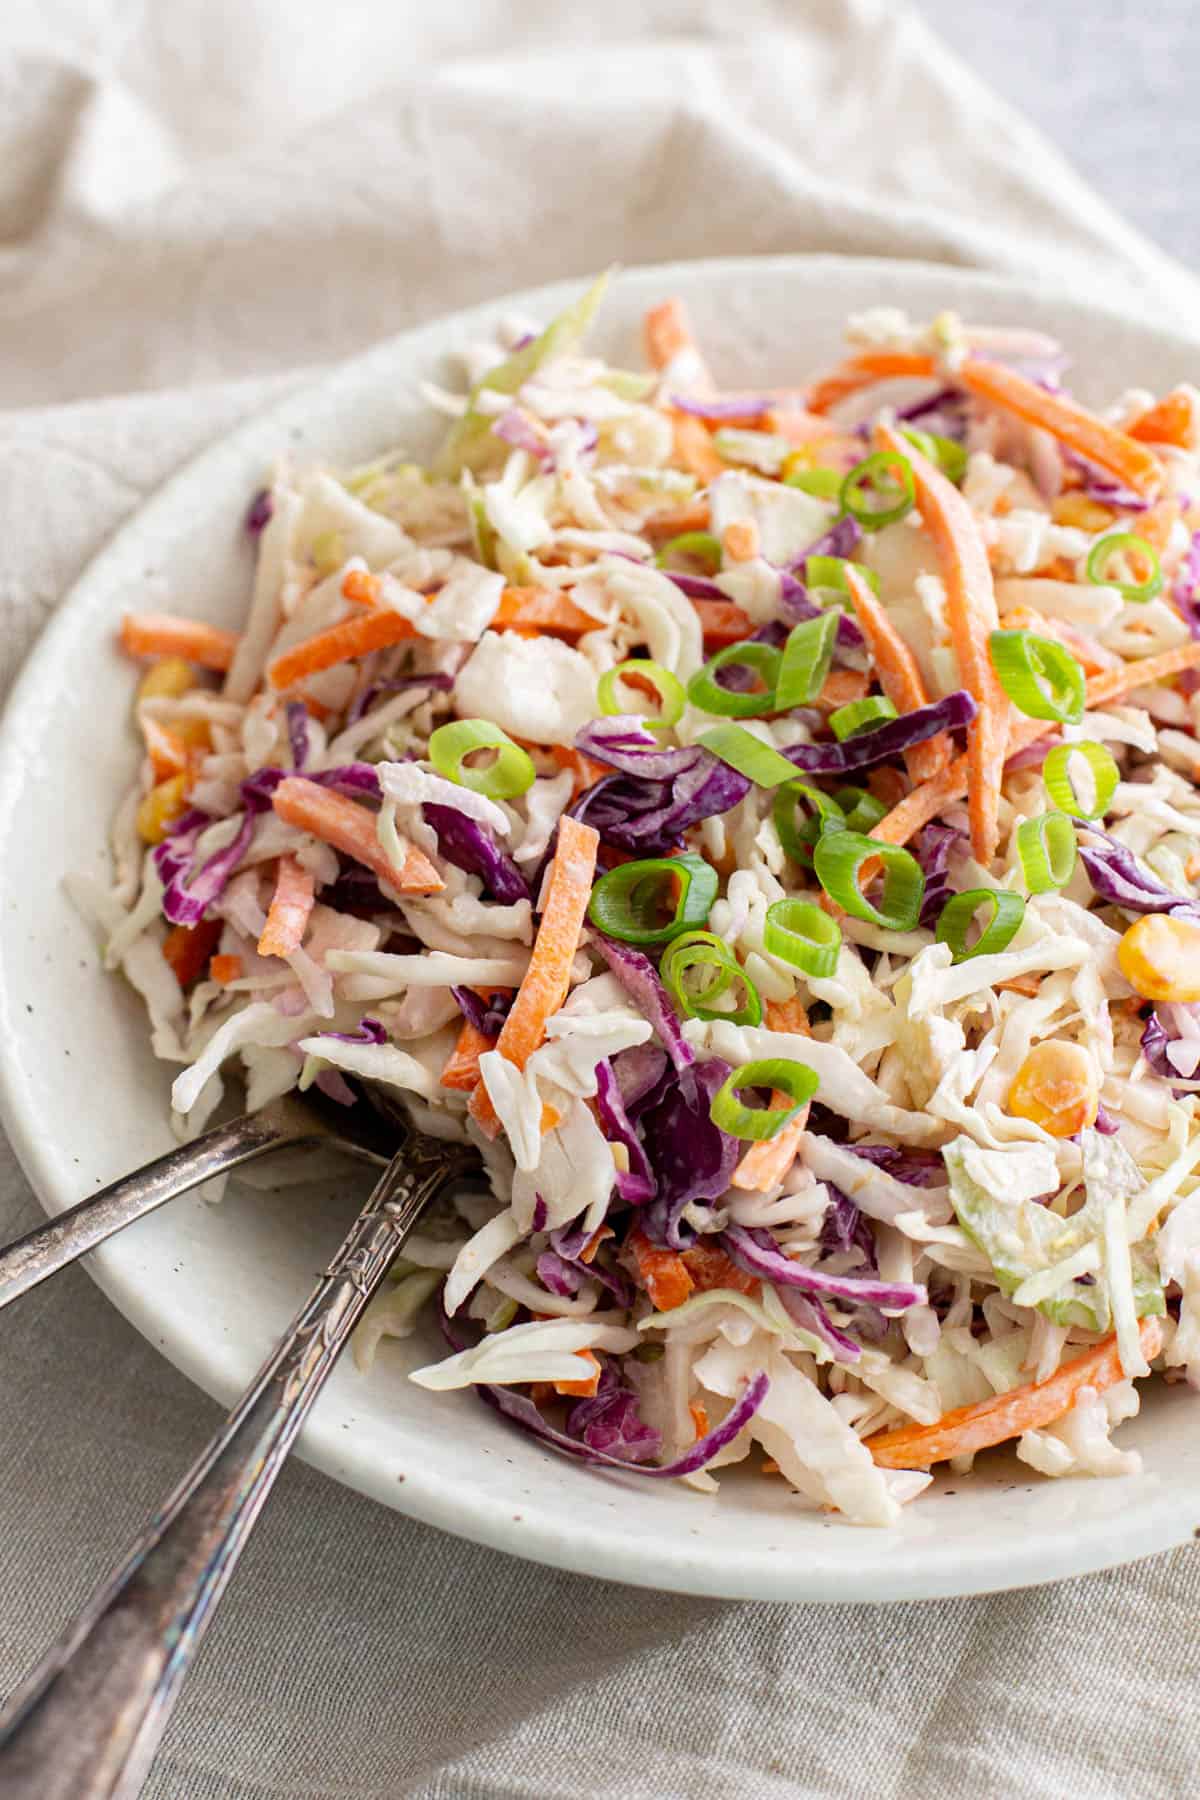 A rainbow of vegetables grated into a coleslaw in a white bowl.